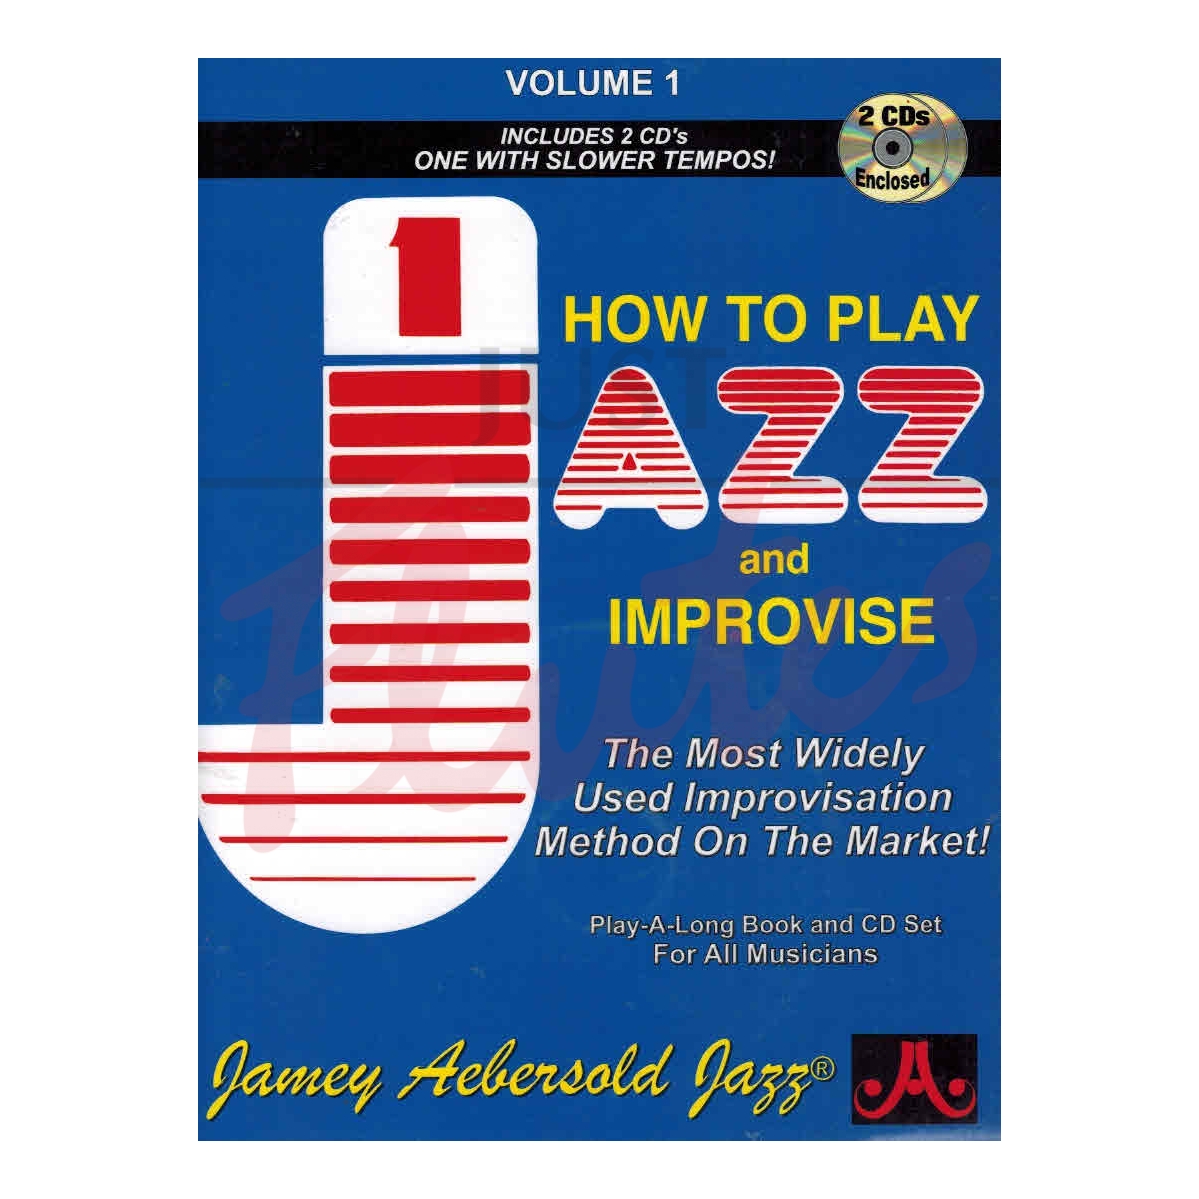 How To Play Jazz and Improvise